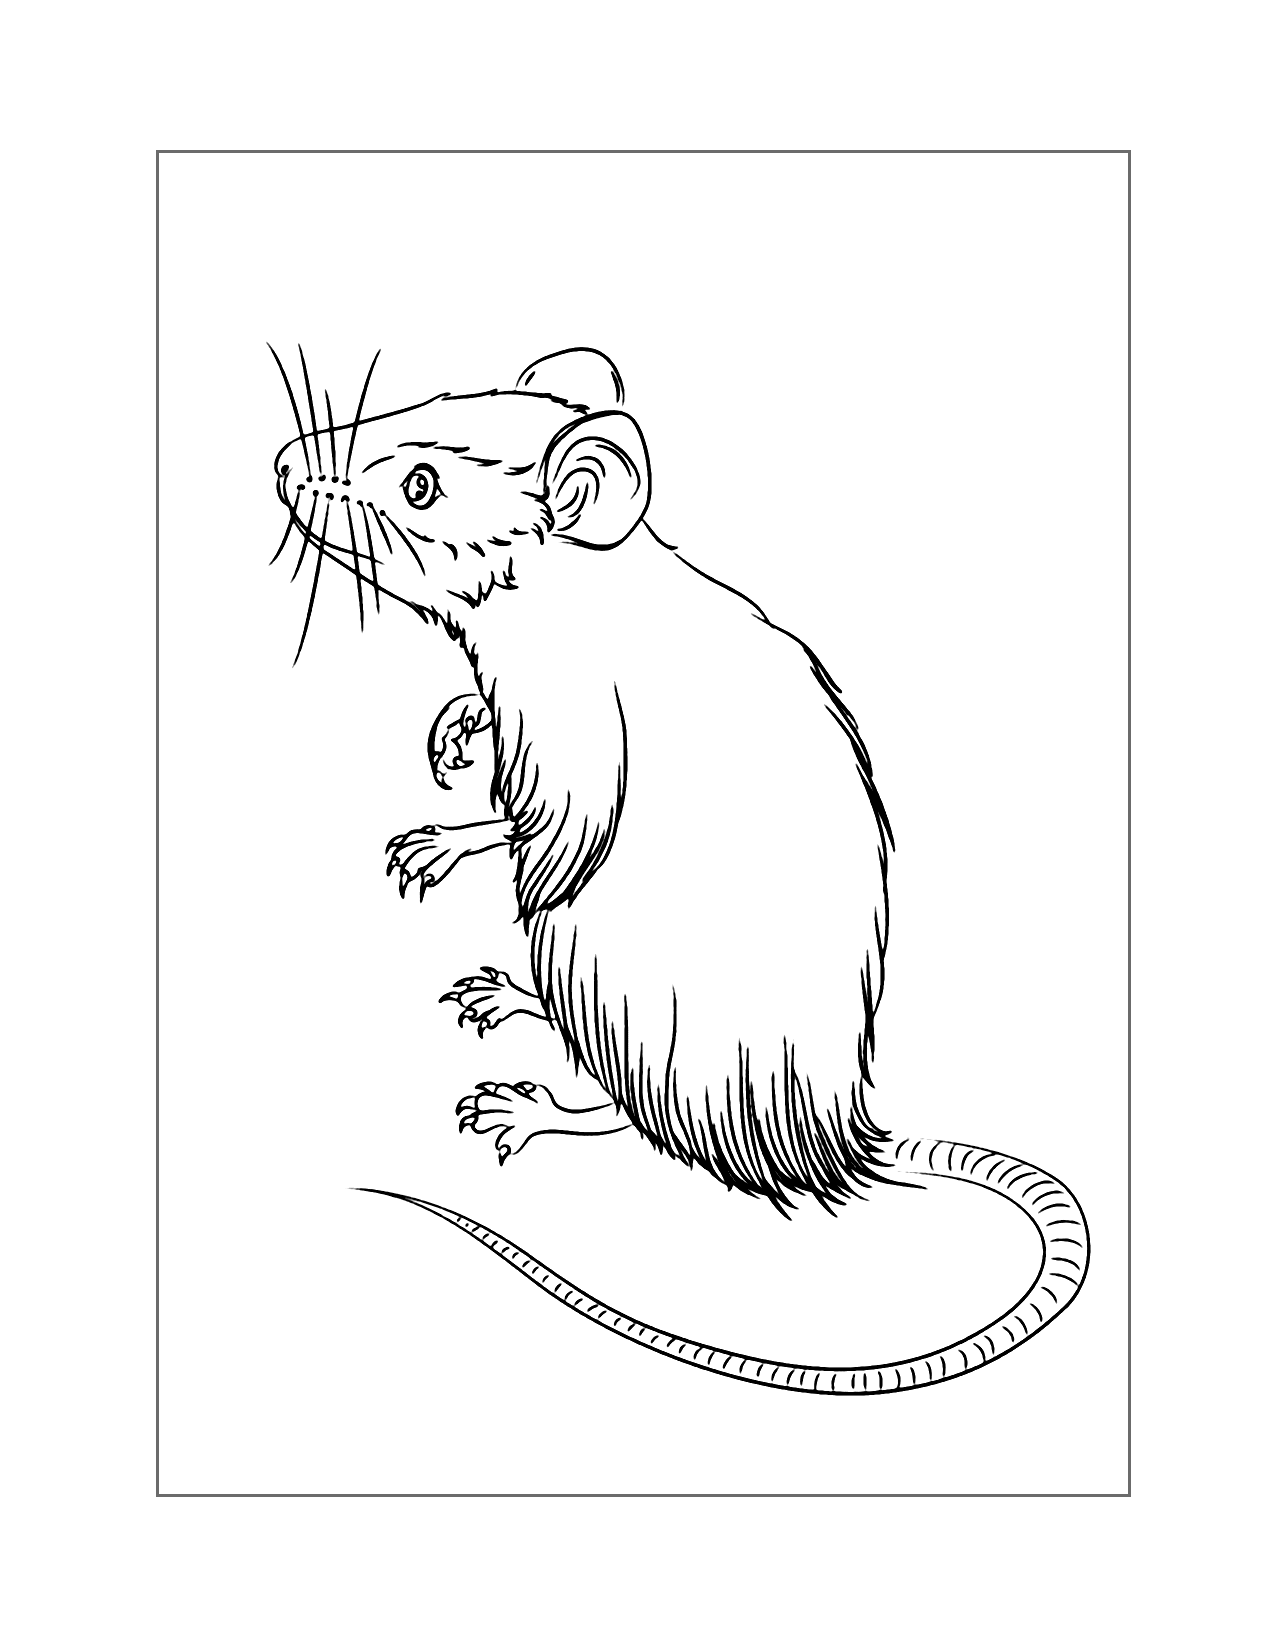 Mouse On Hind Legs Coloring Page